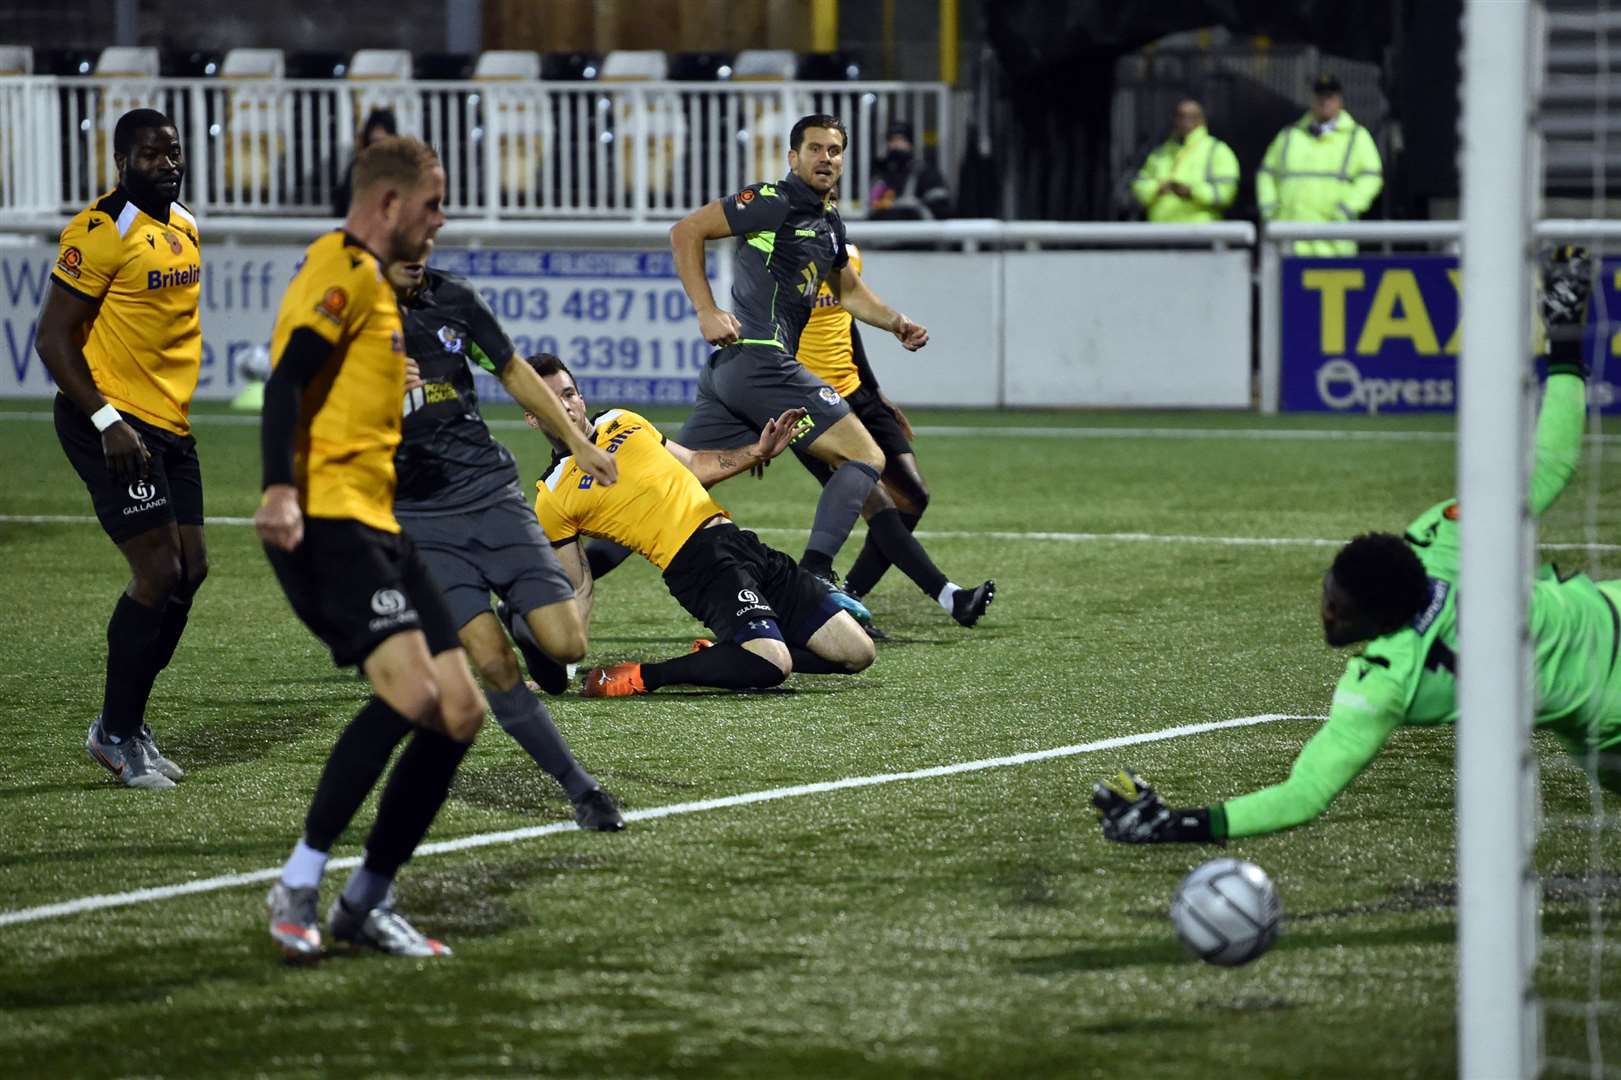 Dartford captain Tom Bonner opens the scoring at Maidstone - minutes after copping an unfortunate one from George Porter Picture: Keith Gillard